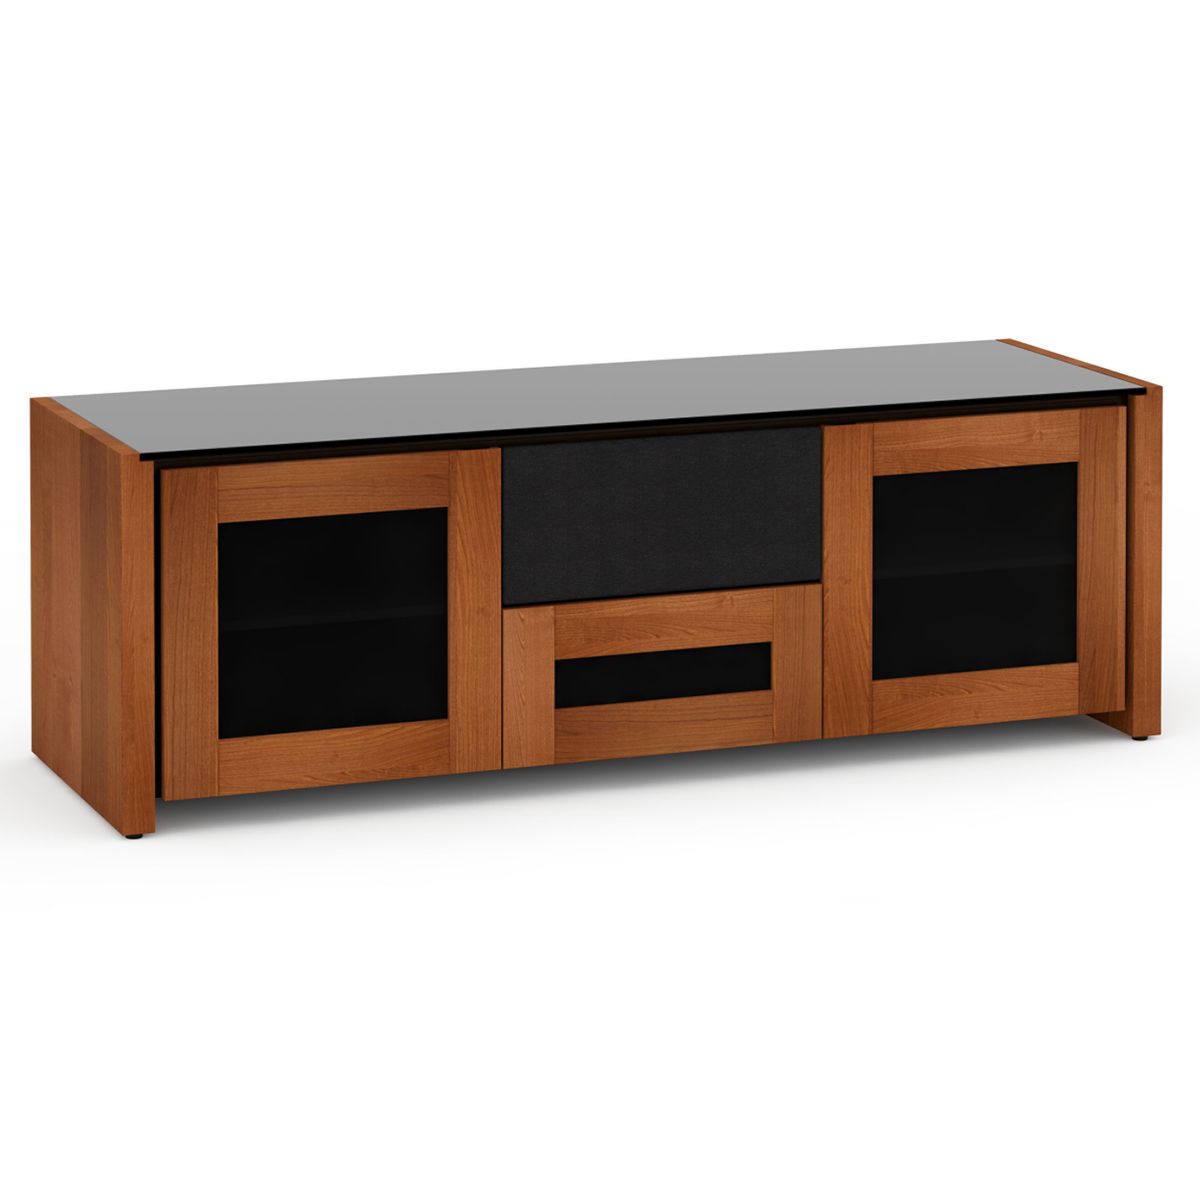 Salamander Designs Corsica 236  Triple-Width AV Cabinet with Center Speaker Opening - American Cherry- front view